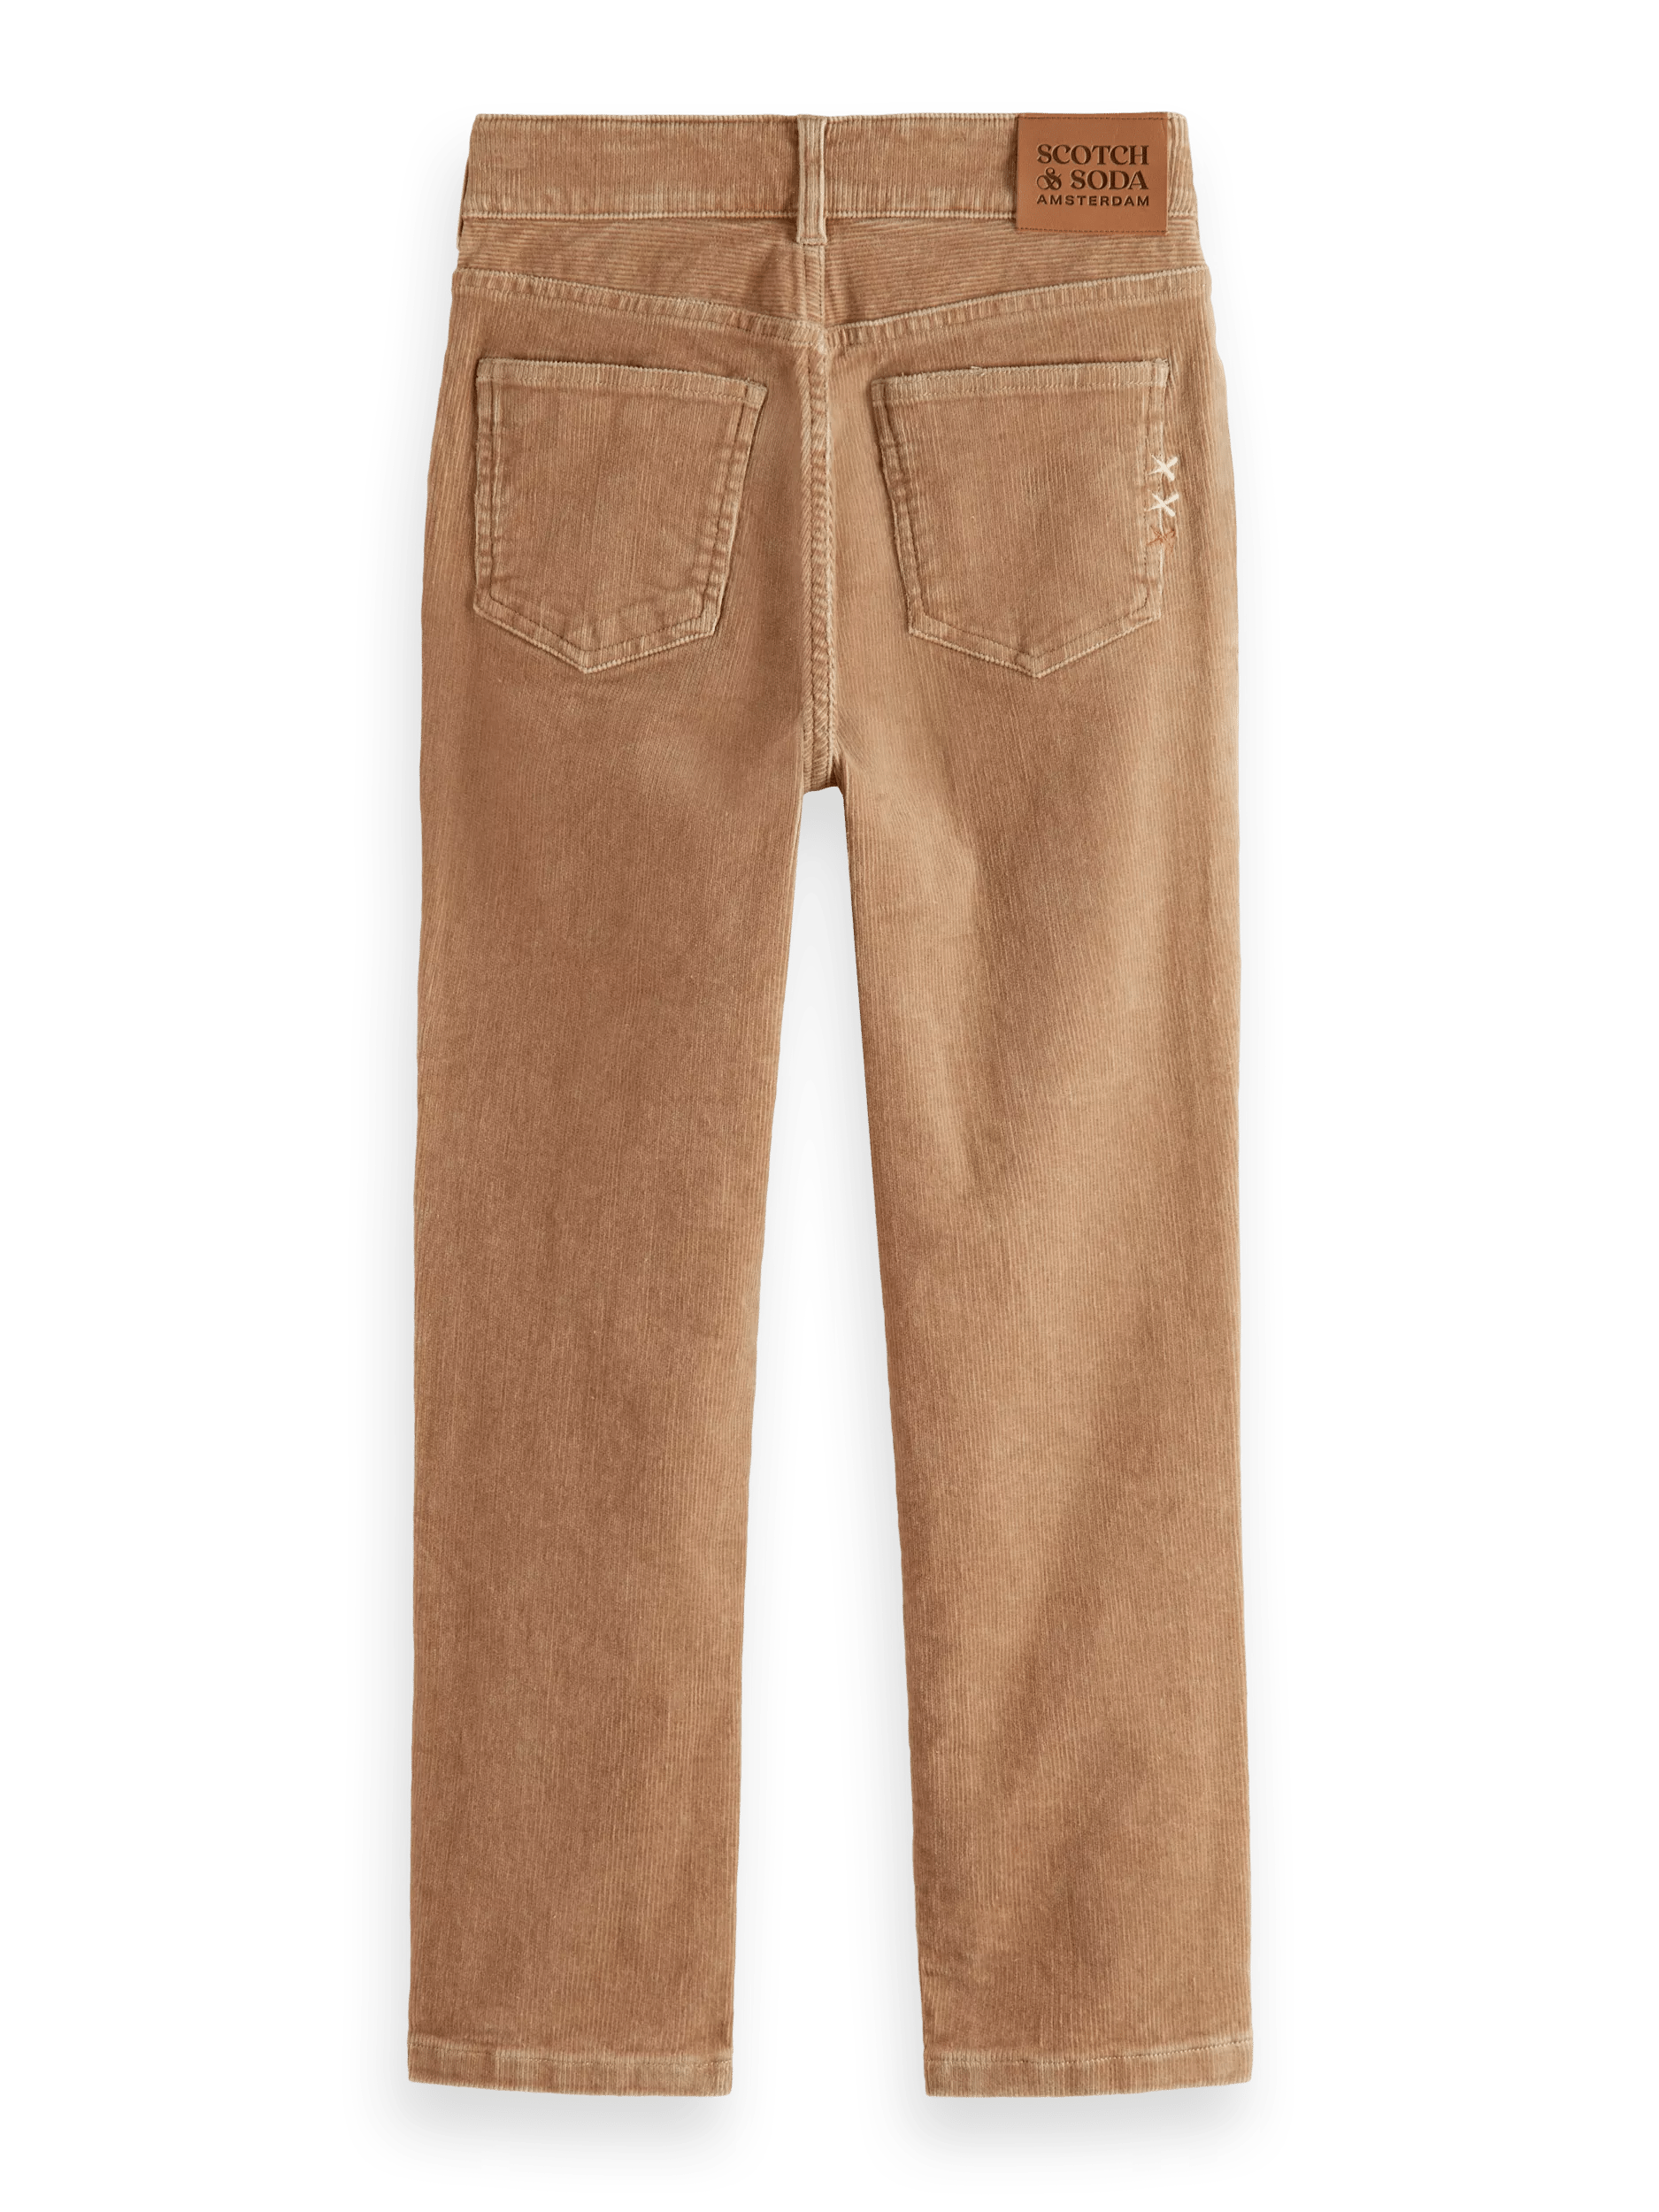 Scotch & Soda Dean loose tapered jeans in corduroy colours BCK